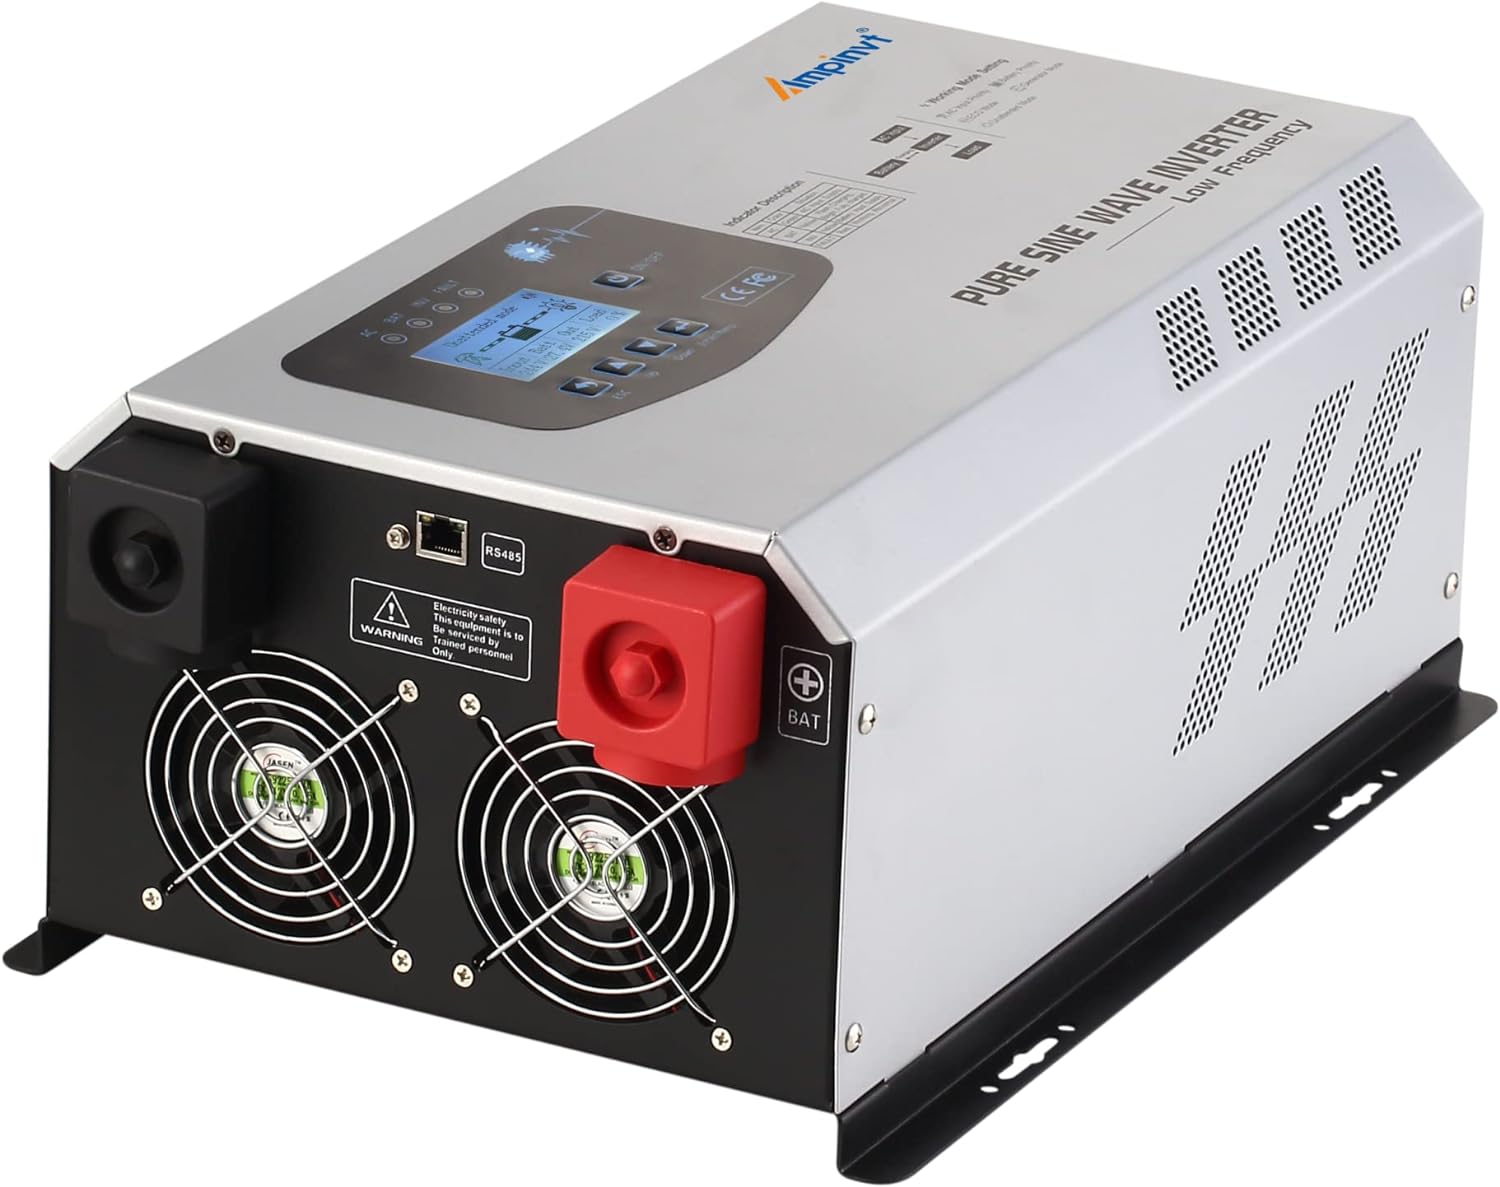 Ampinvt 3000W Inverter: Reliable and Powerful Inverter